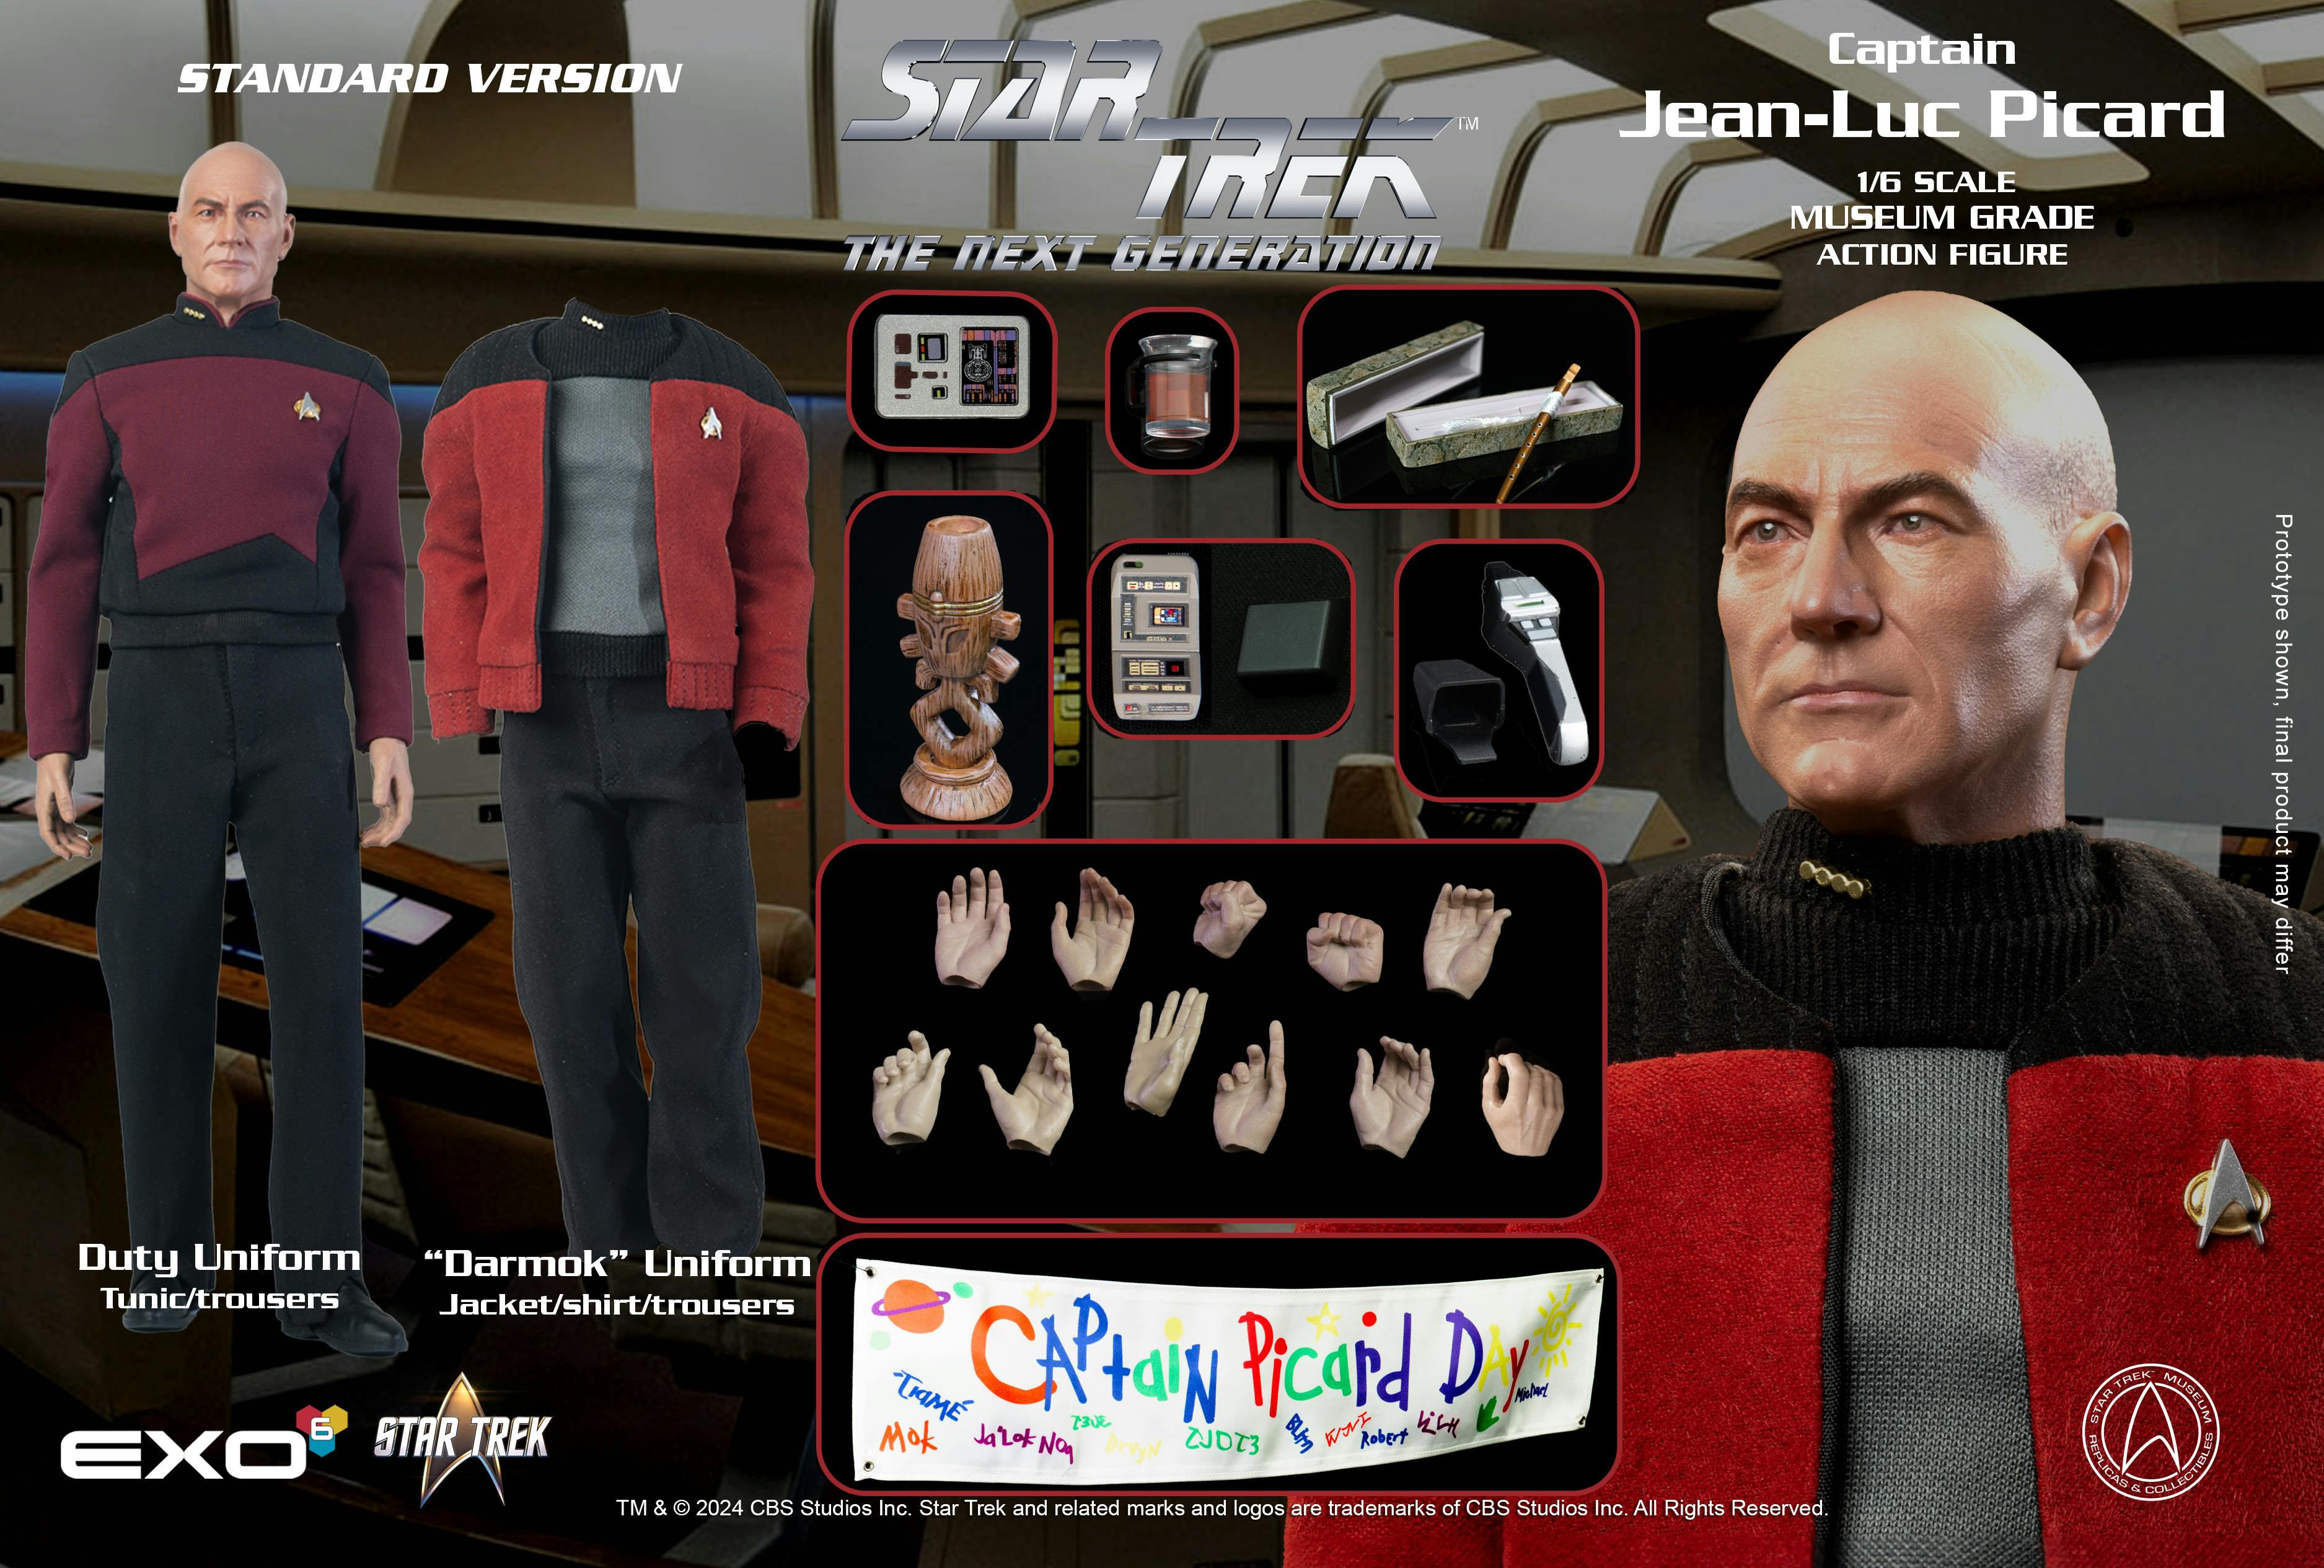 EXO-6 Star Trek: The Next Generation Jean-Luc Picard Standard Version of the figure with all its offerings